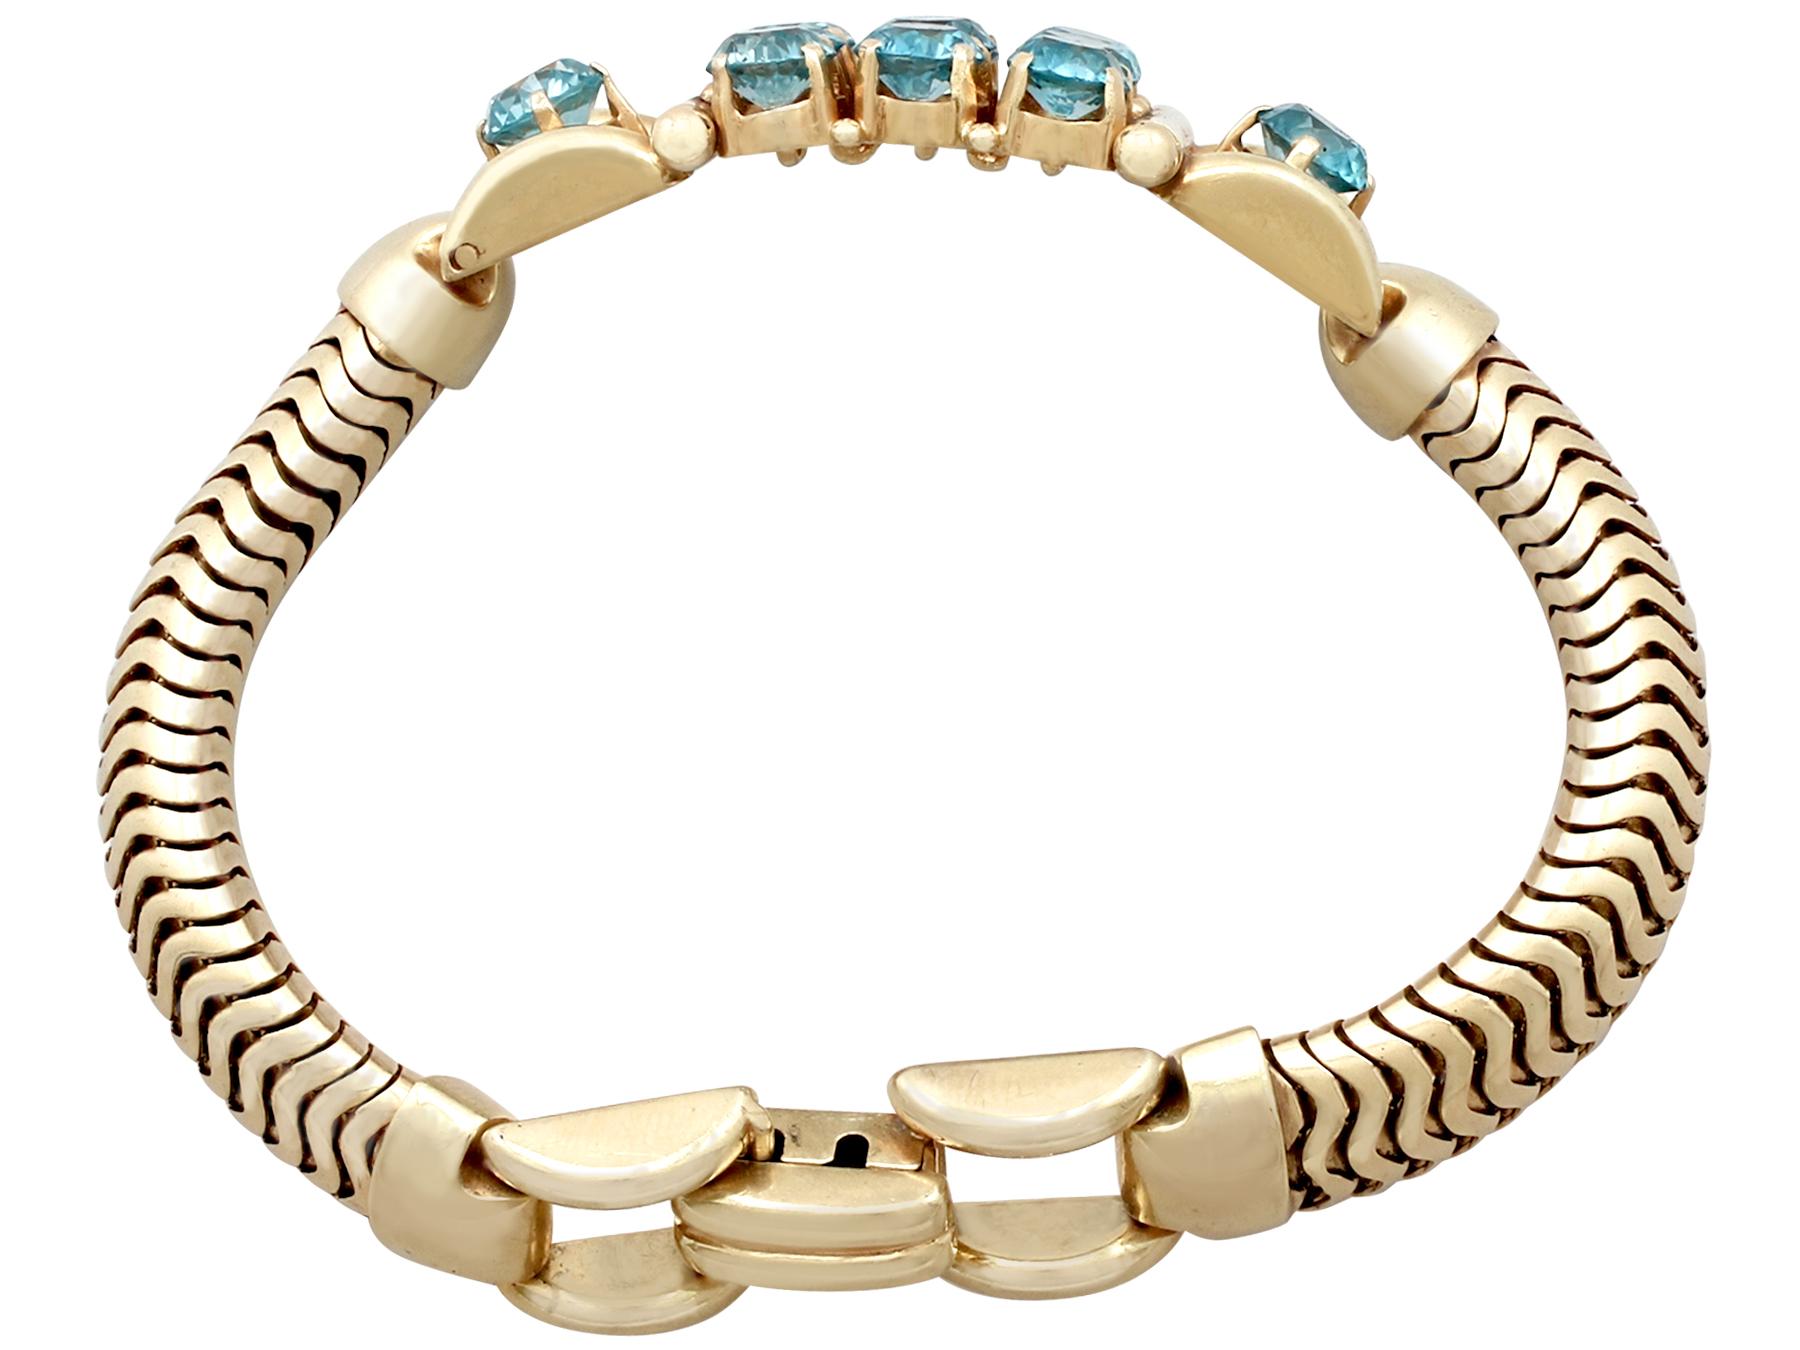 An impressive vintage Art Deco style 12.59 carat high zircon and 14 karat yellow gold bracelet; part of our diverse gemstone jewelry and estate jewelry collections

This stunning, fine and impressive vintage zircon bracelet has been crafted in 14k